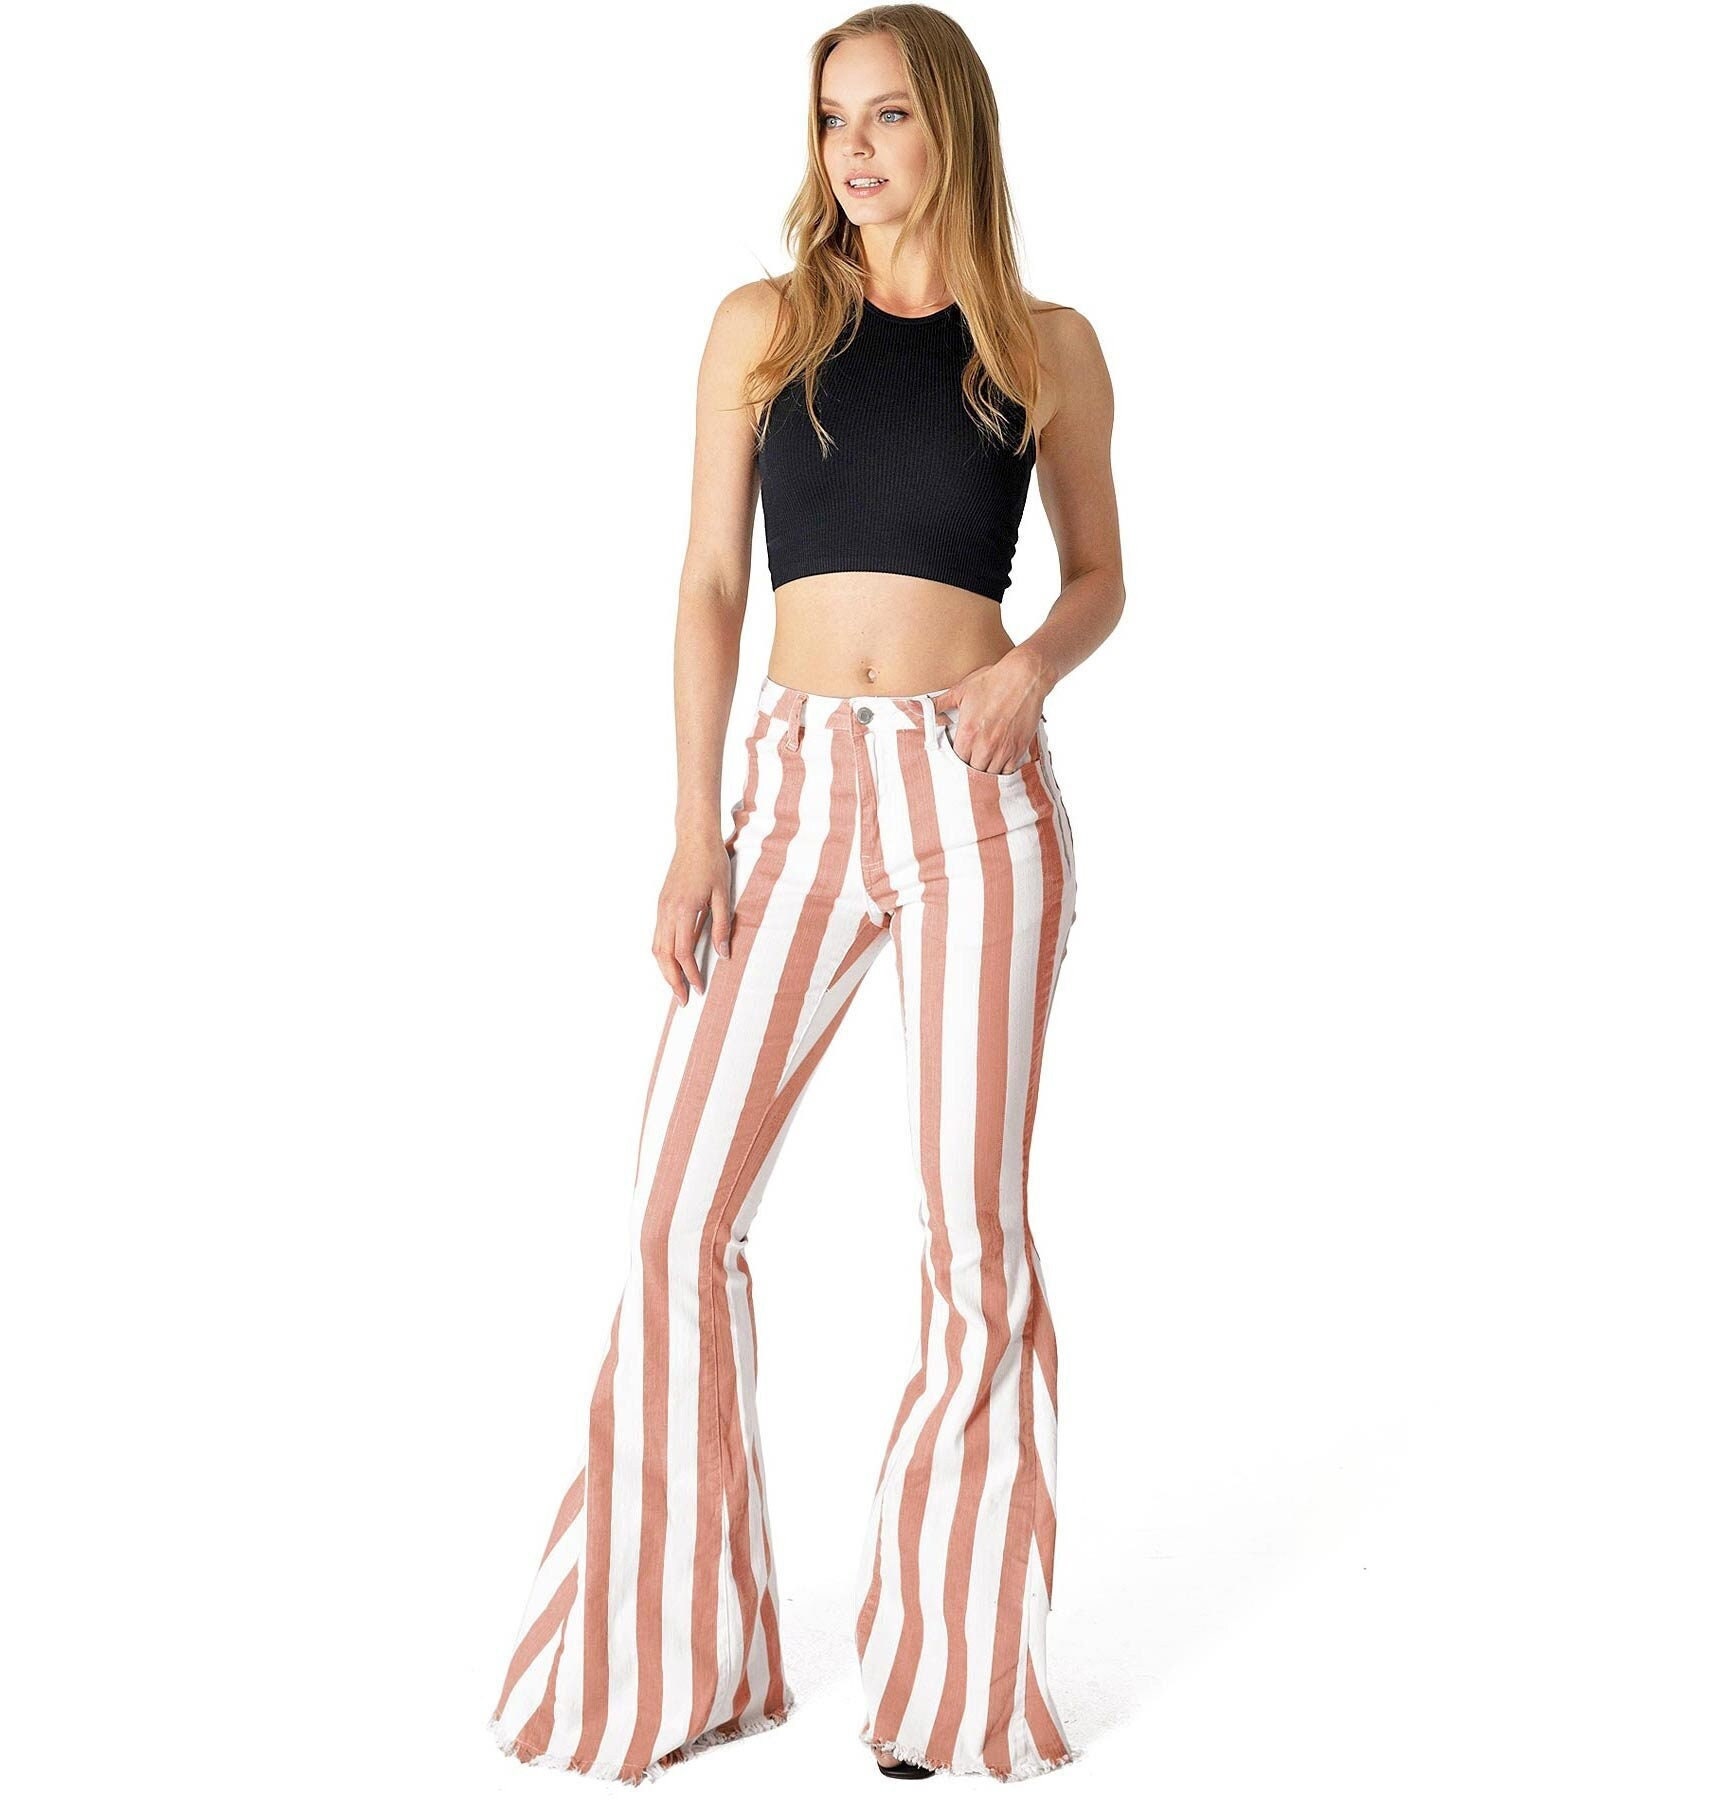 Strawberry High Waisted Flare Pants – The ZigZag Stripe